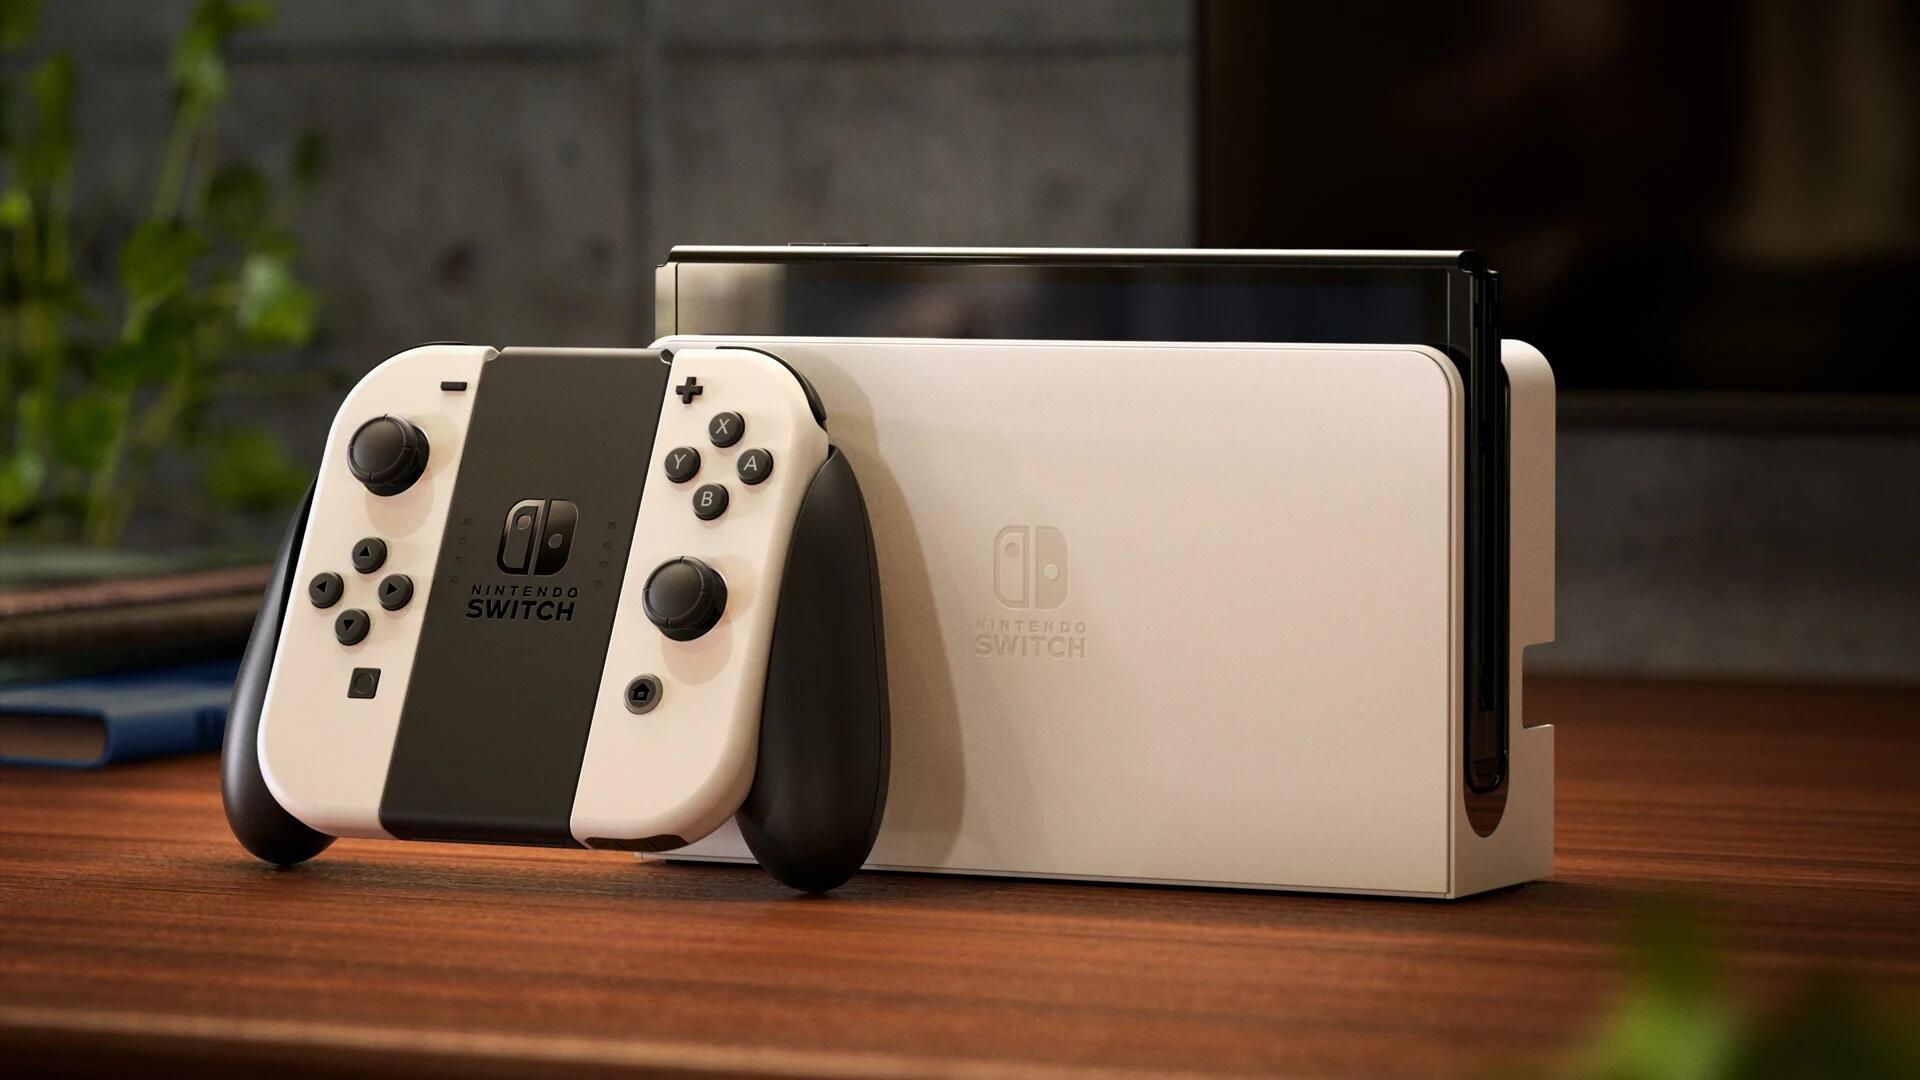 Black Friday 2021: The best Nintendo Switch Deals right now